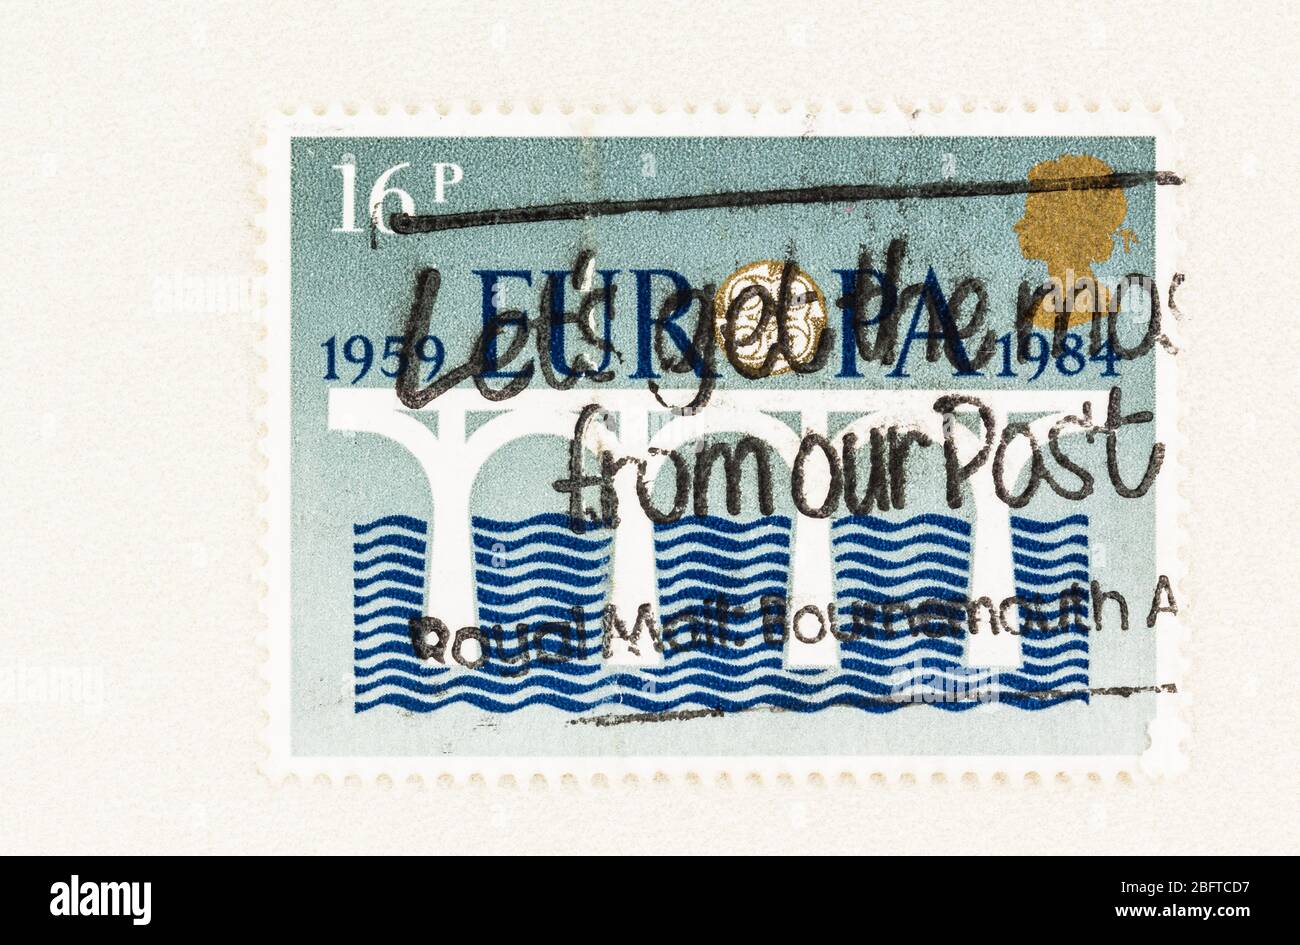 SEATTLE WASHINGTON - April 18, 2020: Close up of 1984 Europa  stamp of Great Britain, featuring a bridge over water, commemorating 25th anniversary of Stock Photo